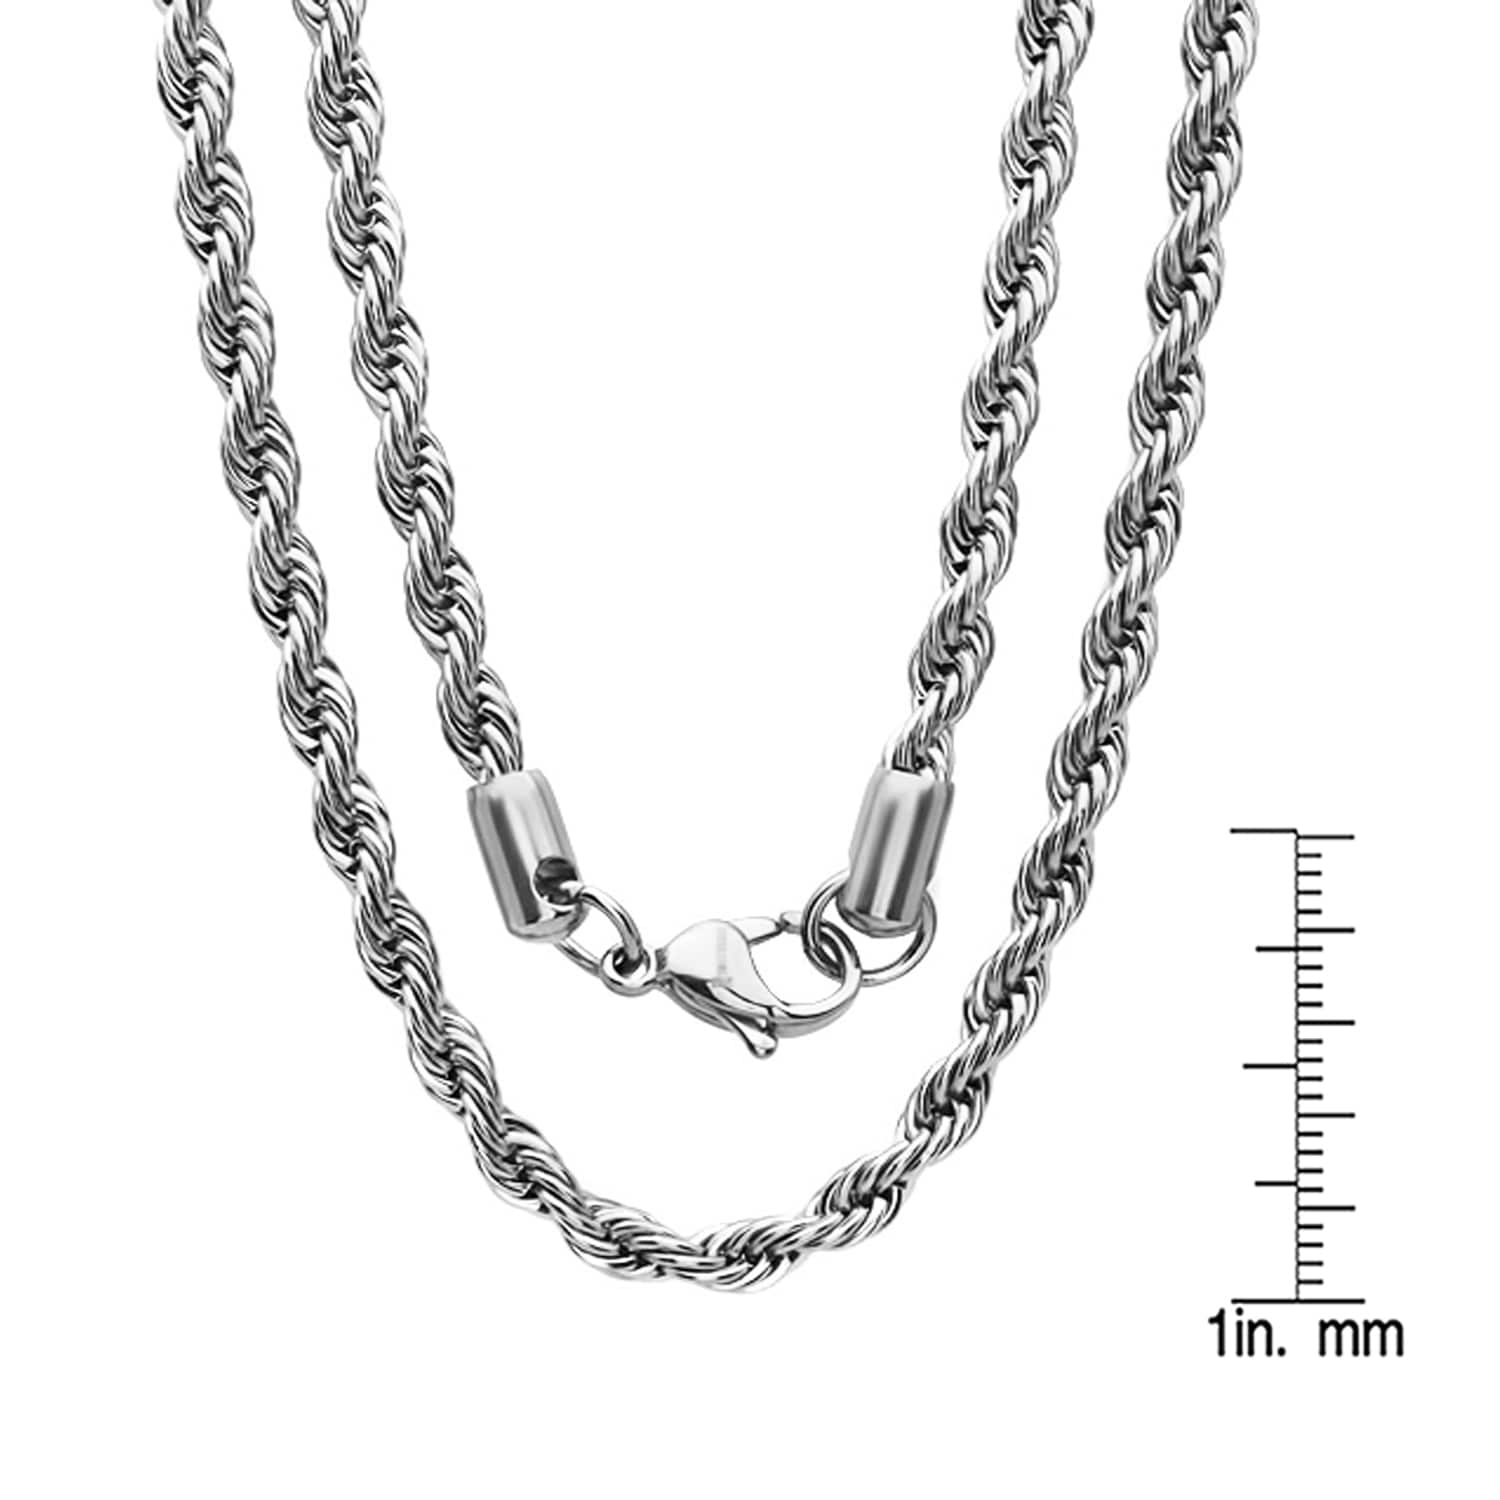 Thick Stainless Steel Rope Chain 